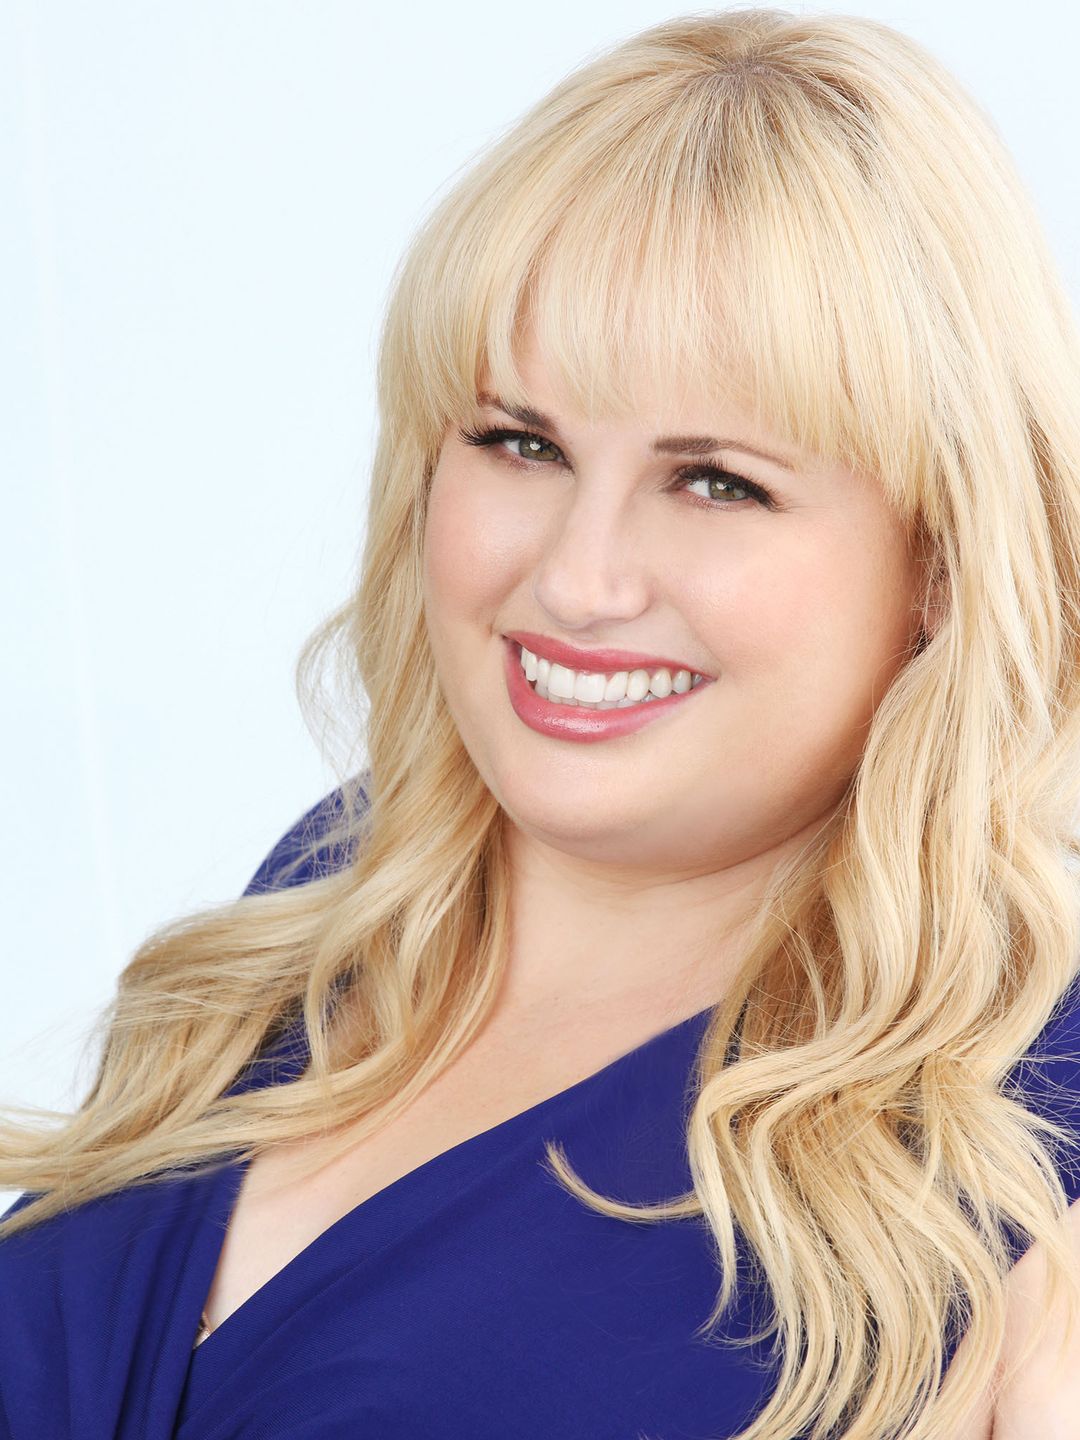 Rebel Wilson in her youth